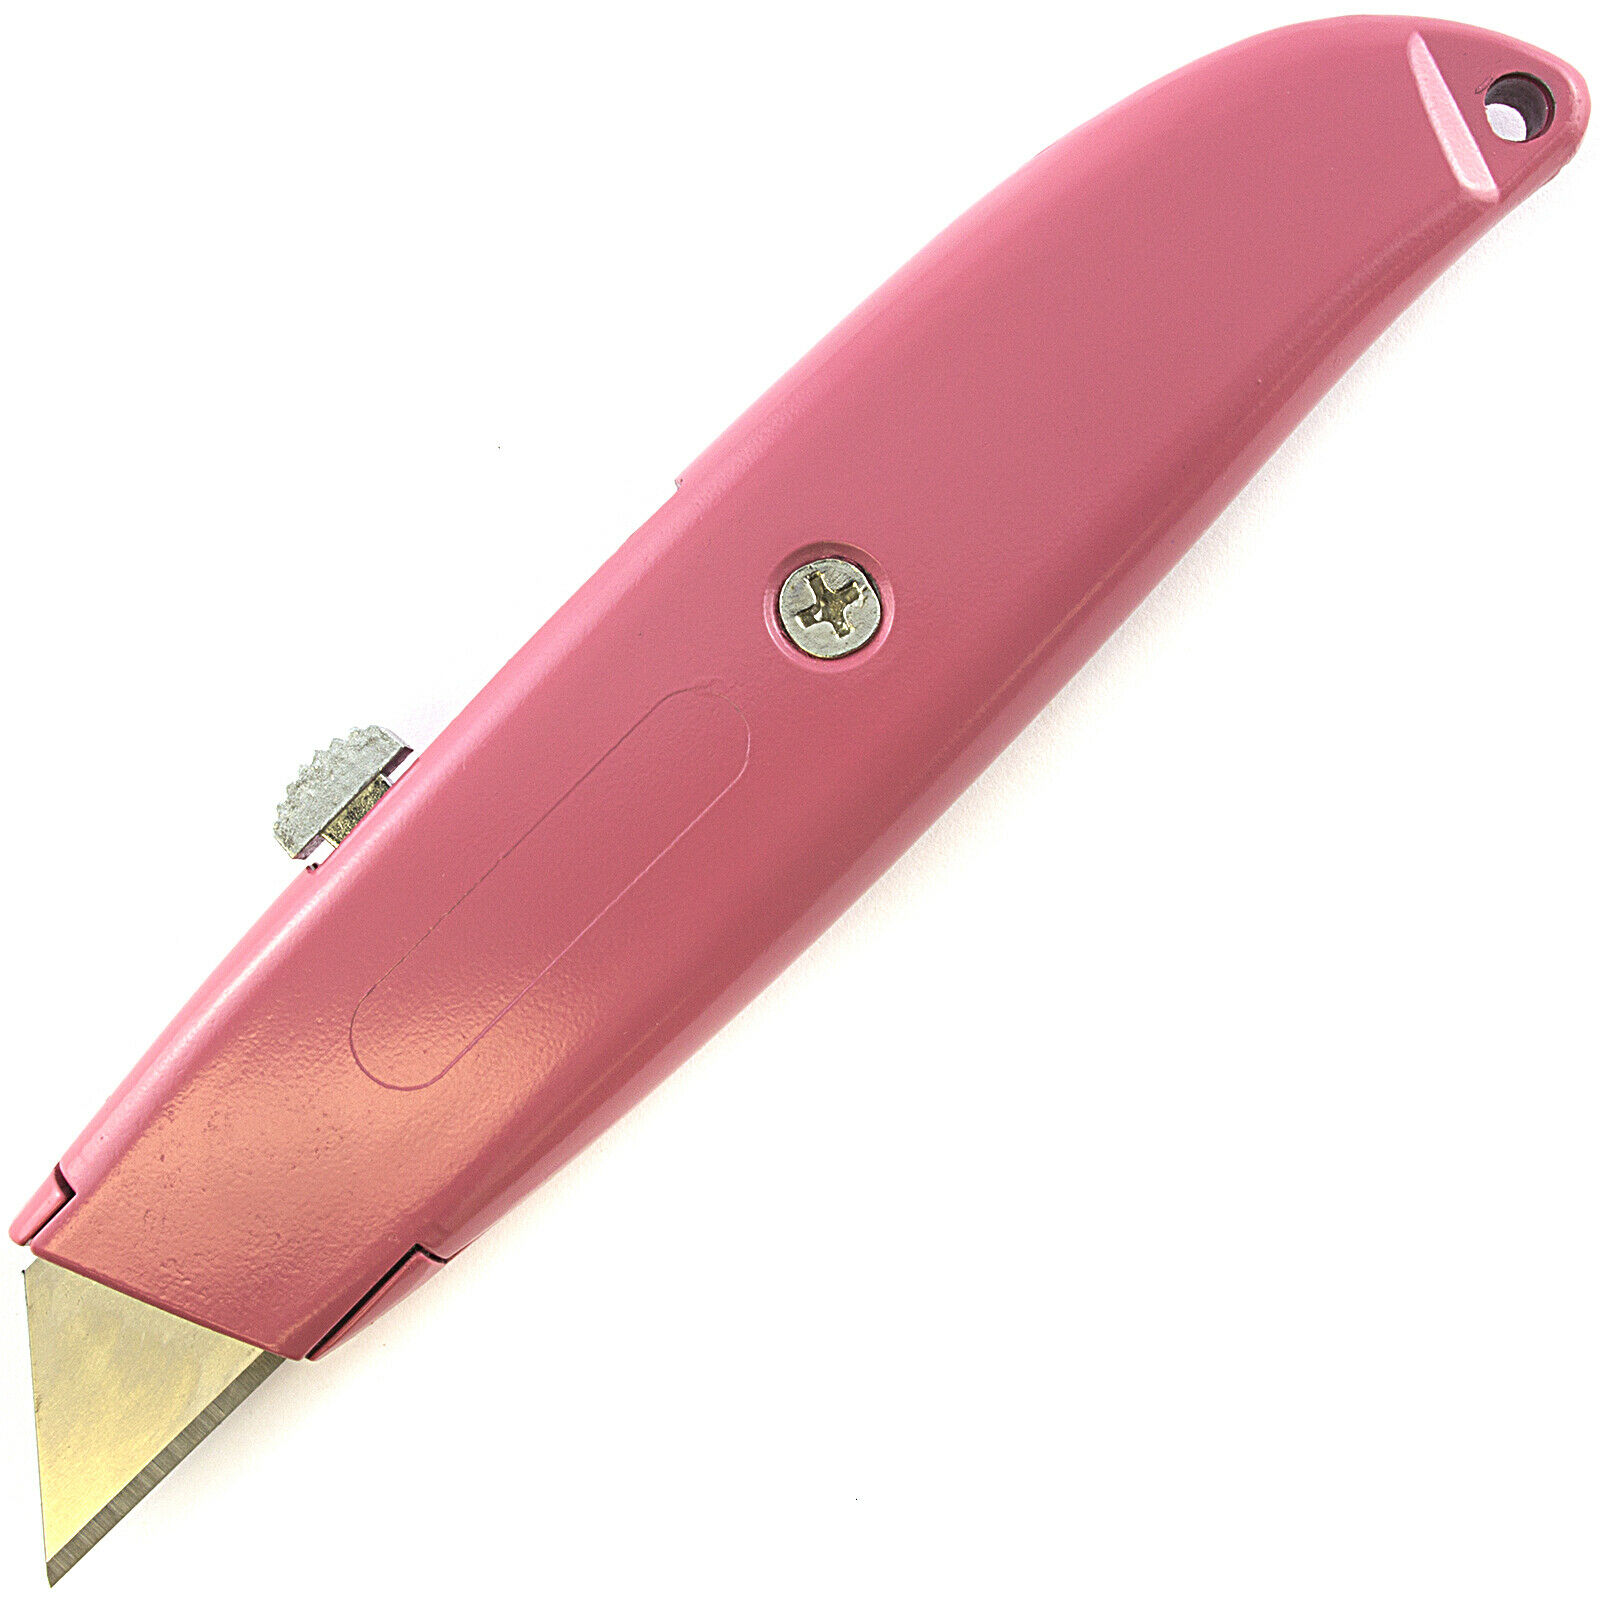 Ladies Pink Utility Knife Box Cutter 3 Position Retractable Blade Lock Tool